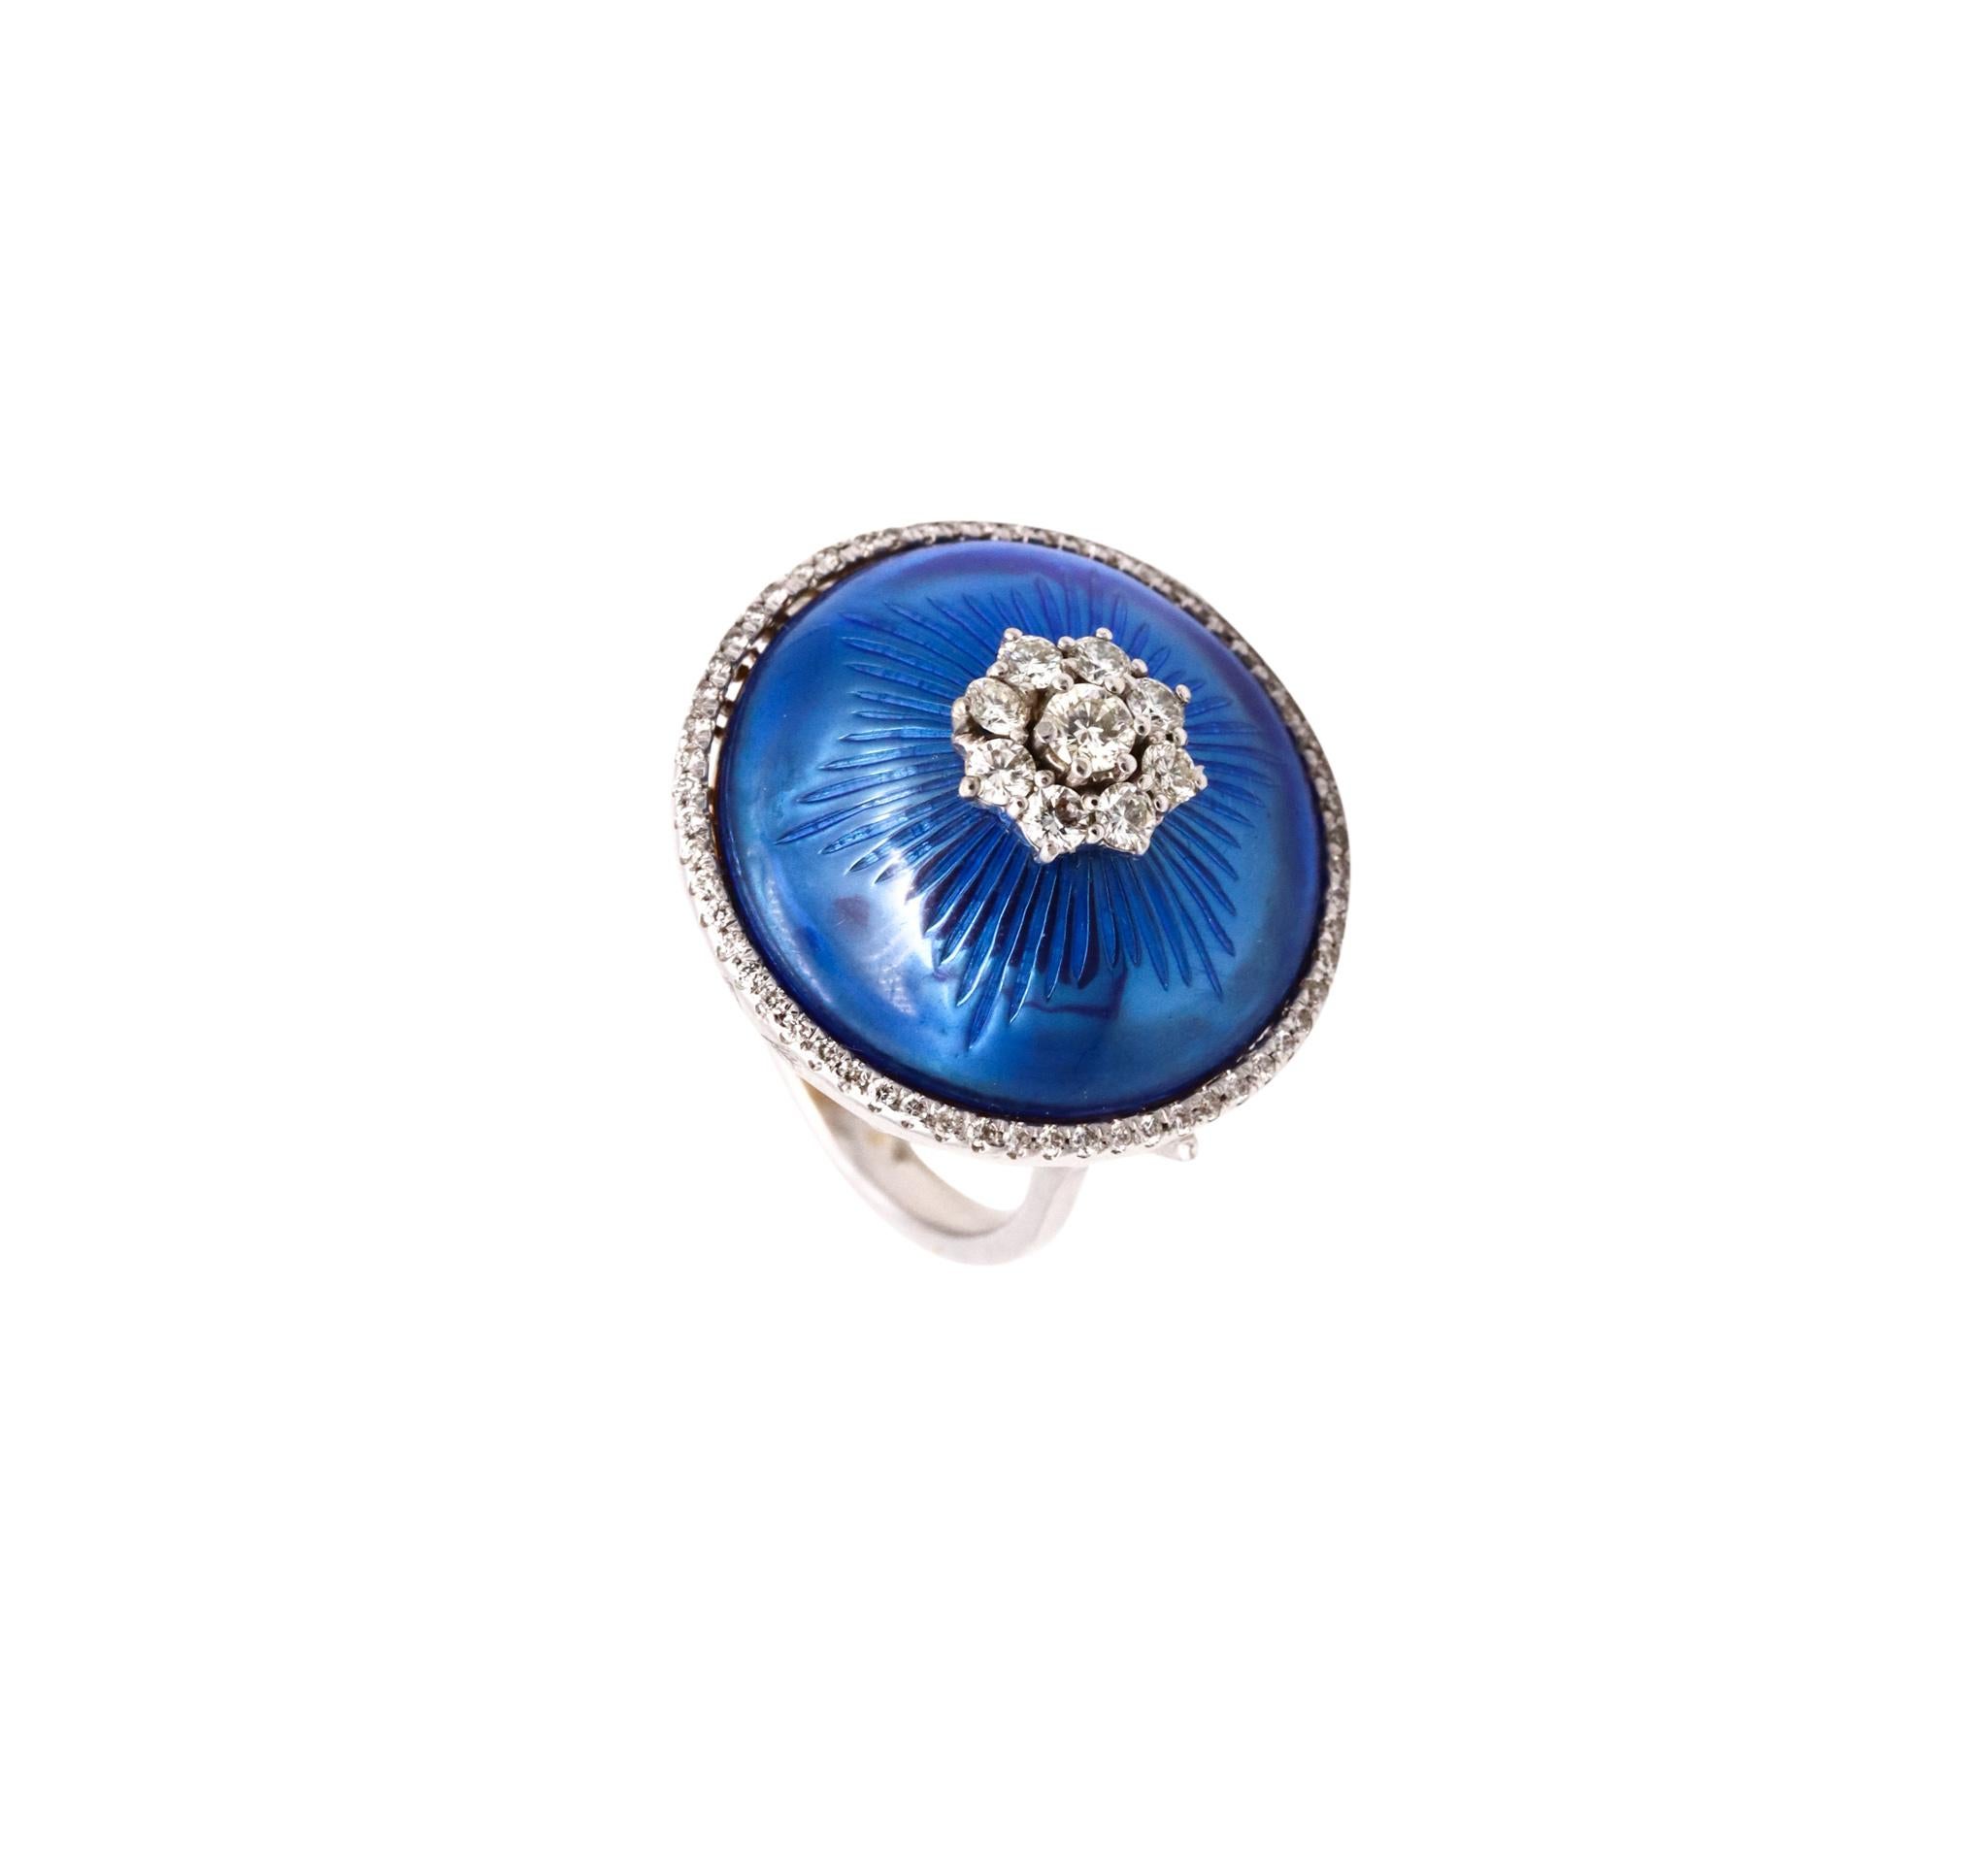 Jeweled domed cocktail ring with Blue Enamel.

Very handsome and colorful modernist piece, created in the early 1970's. It was carefully crafted in solid 18 karats white gold and finished, with very high polish.

The domed part is embellished with